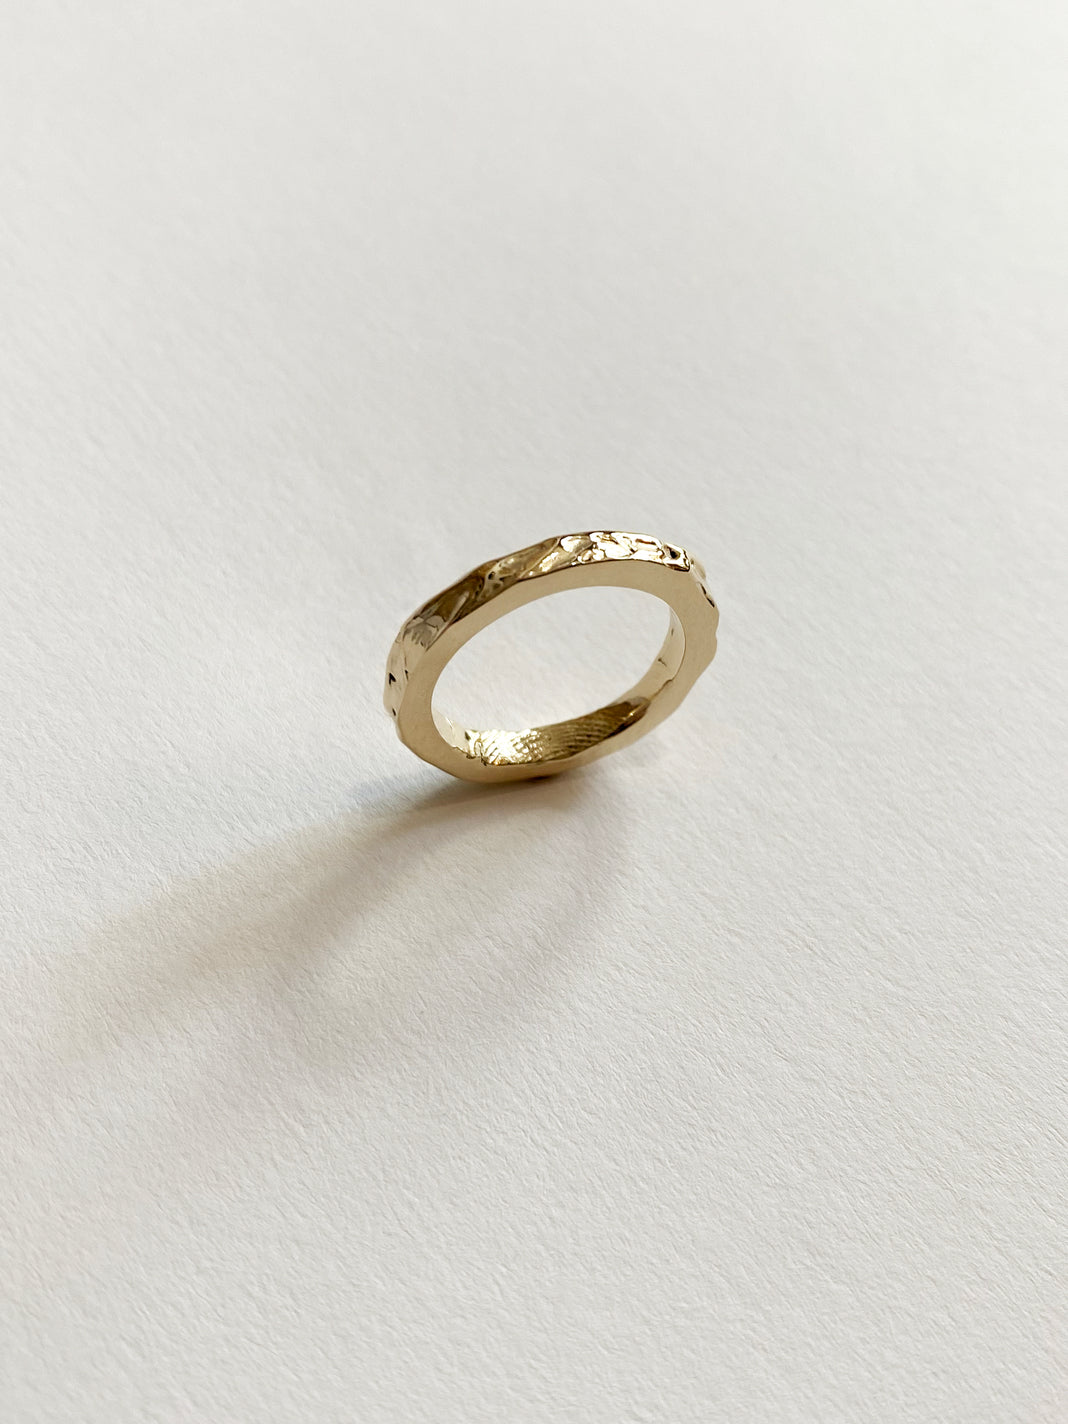 a shiny yellow gold band ring with a crinkled molten texture on the outside and a fingerprint on the inside